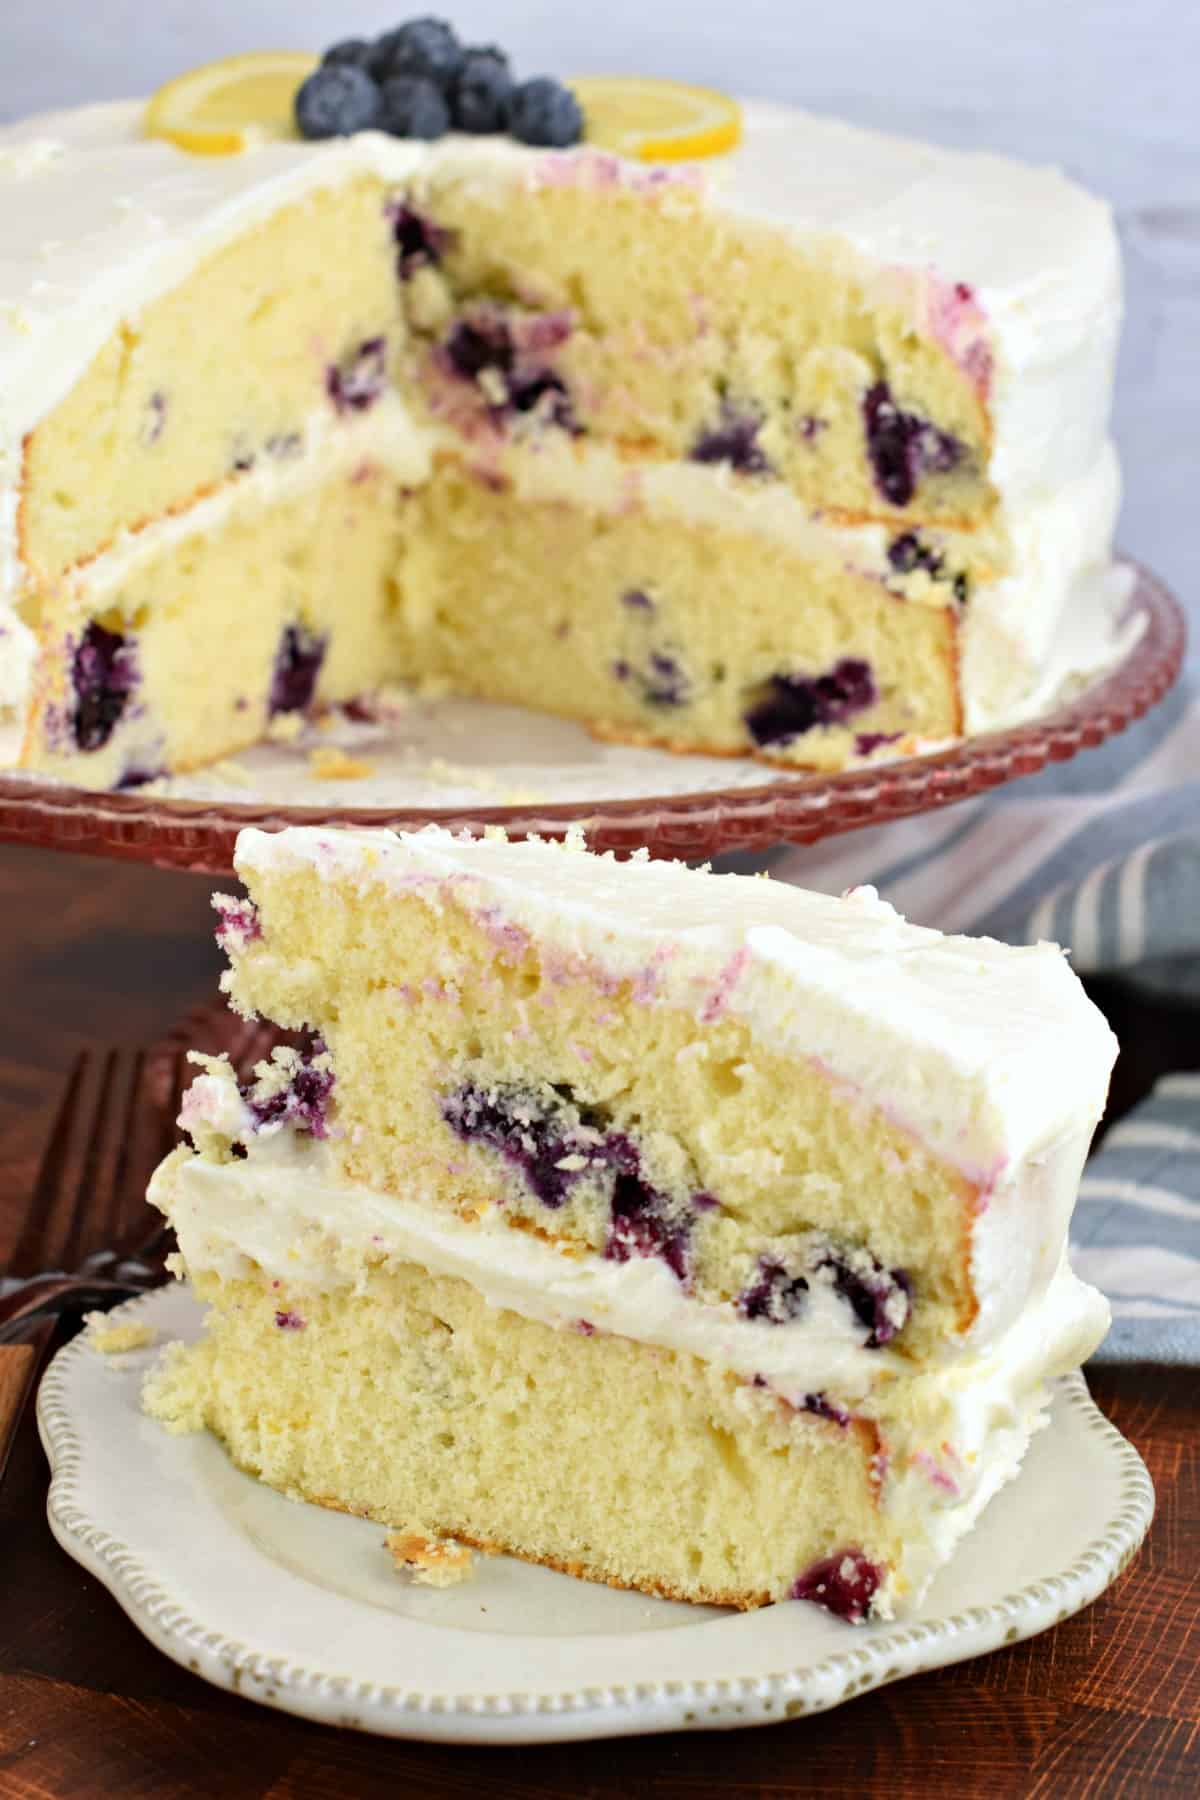 Slice of layered lemon blueberry cake on a white plate, with whole cake on cake stand in background.